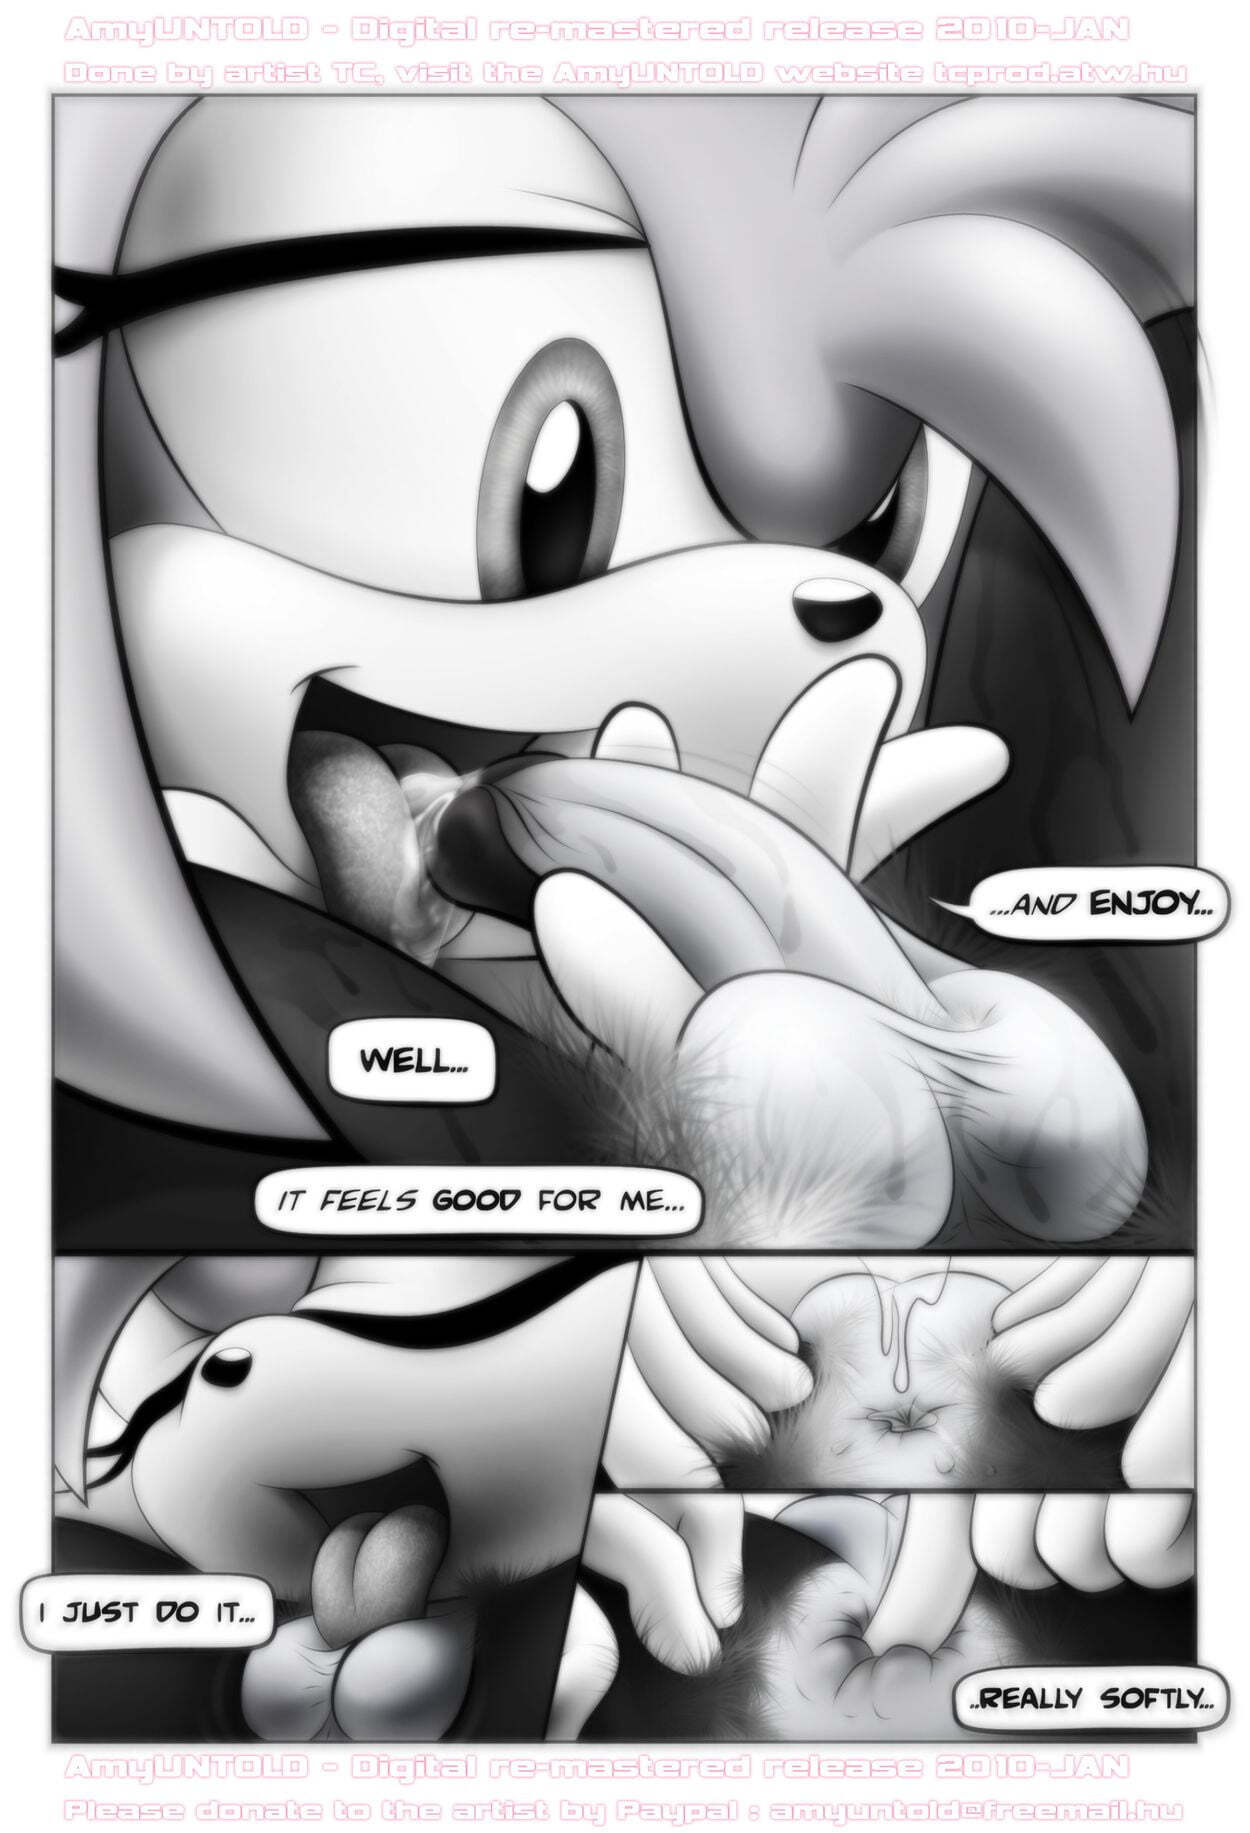 Amy Untold - Finally - Page 39